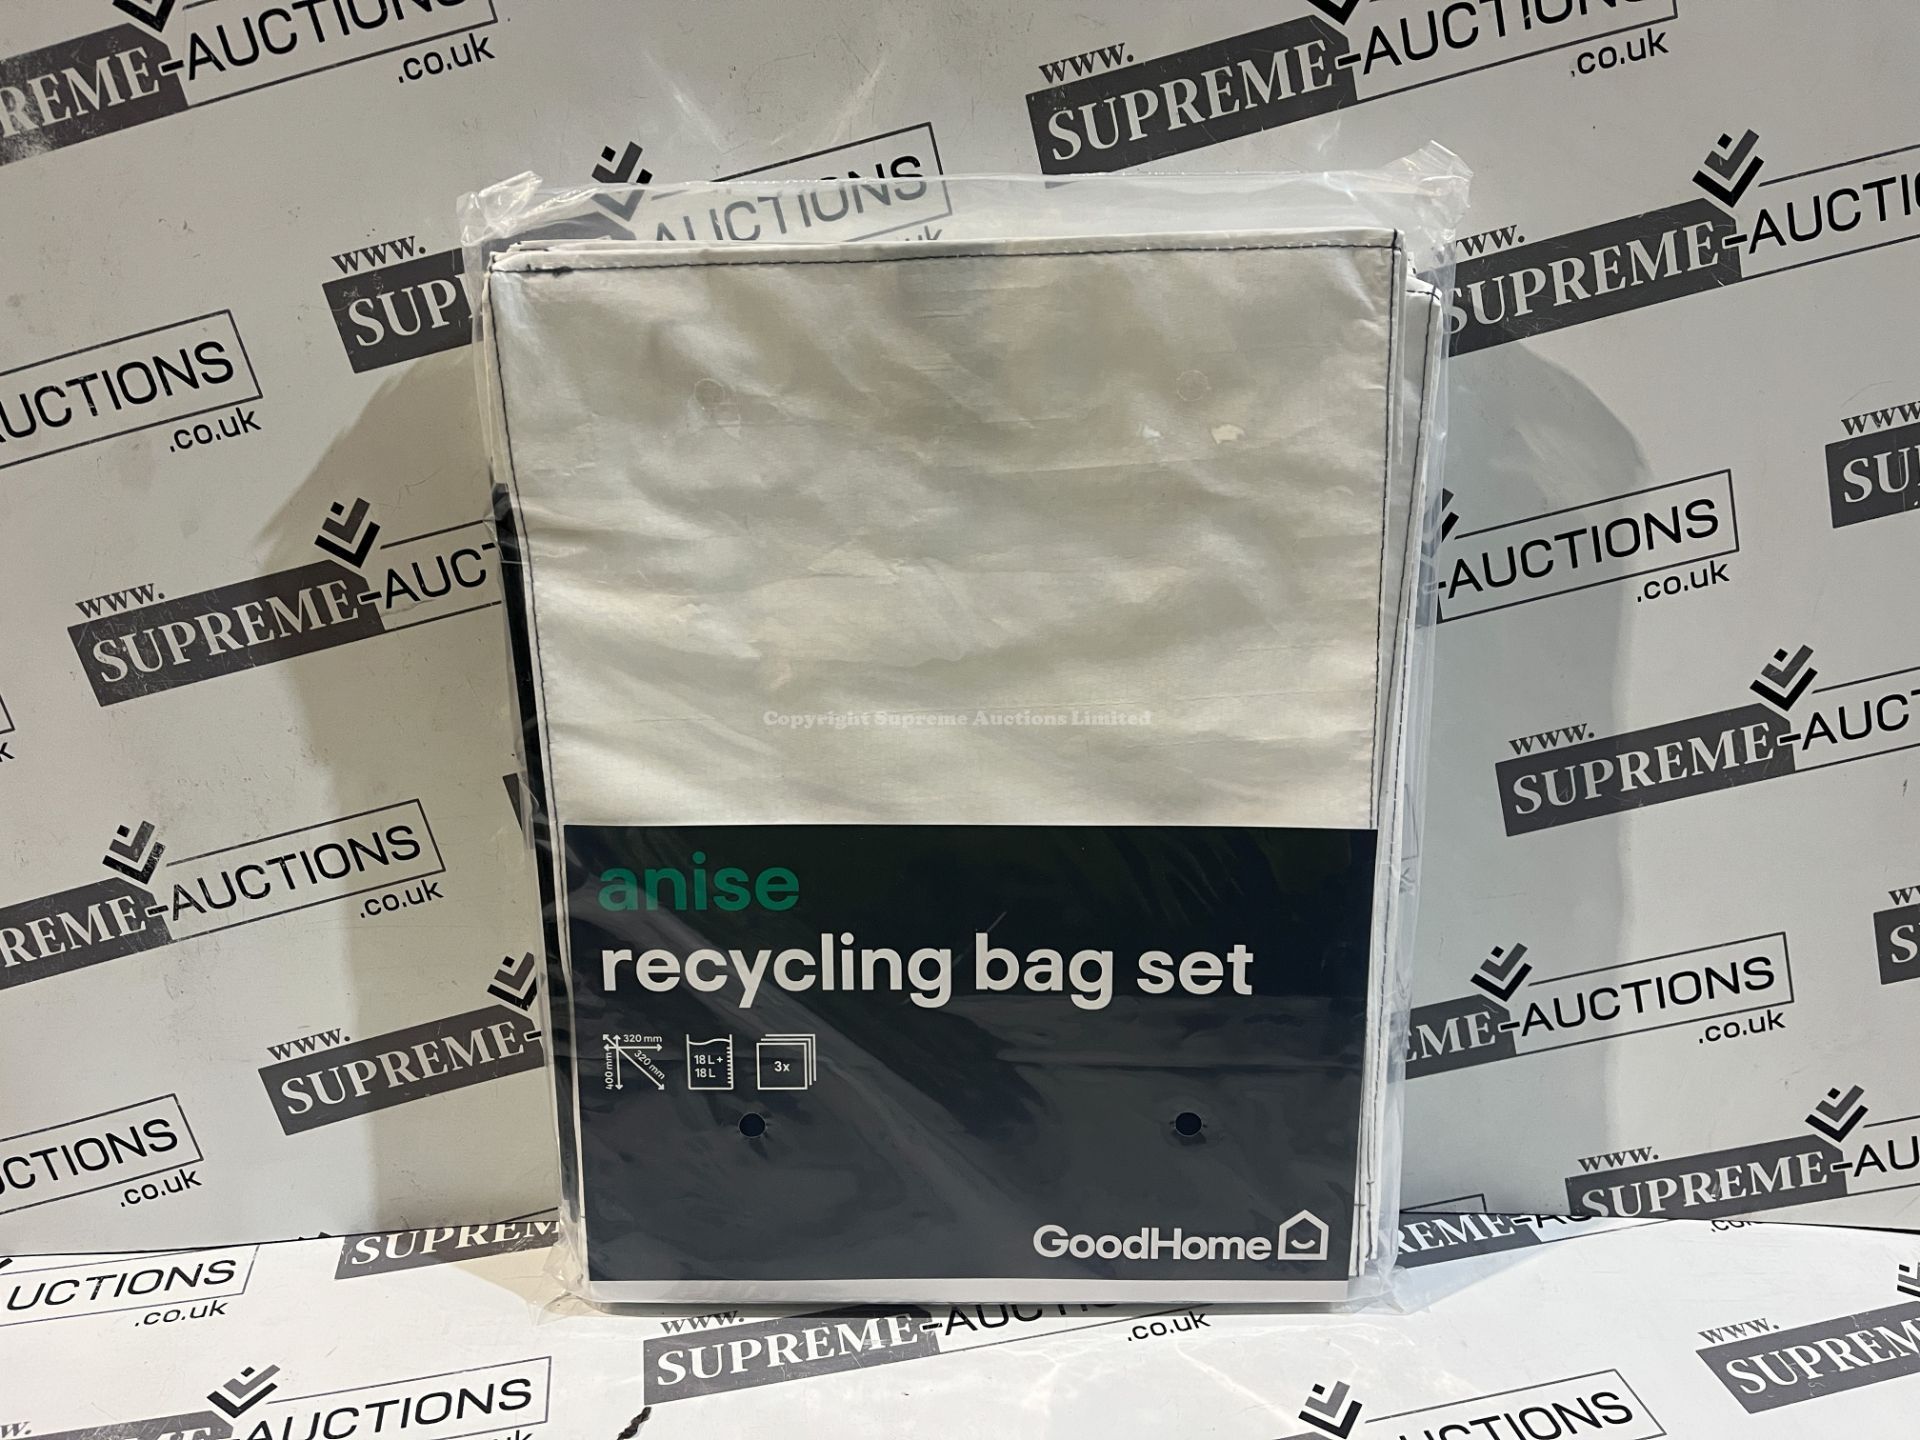 36 X BRAND NEW ANISE RECYCLING BAG SETS S1-14